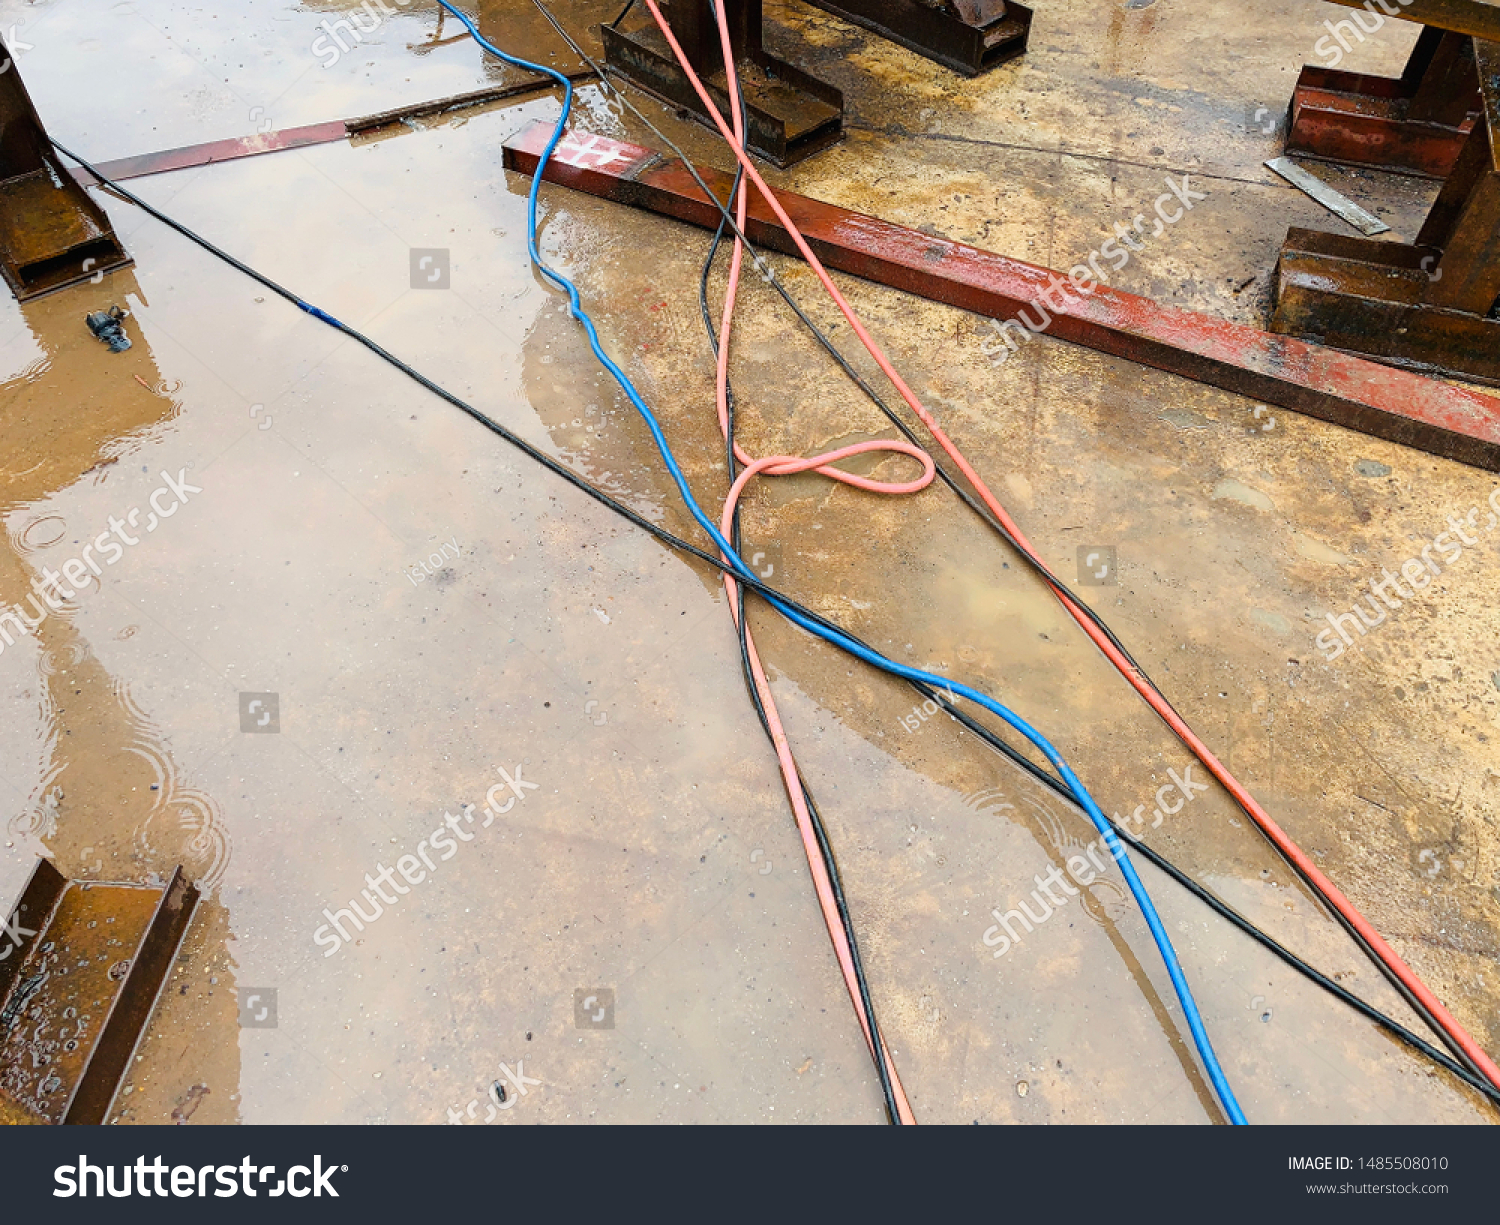 Cable Lay Down On Wet Floor Stock Photo Edit Now 1485508010